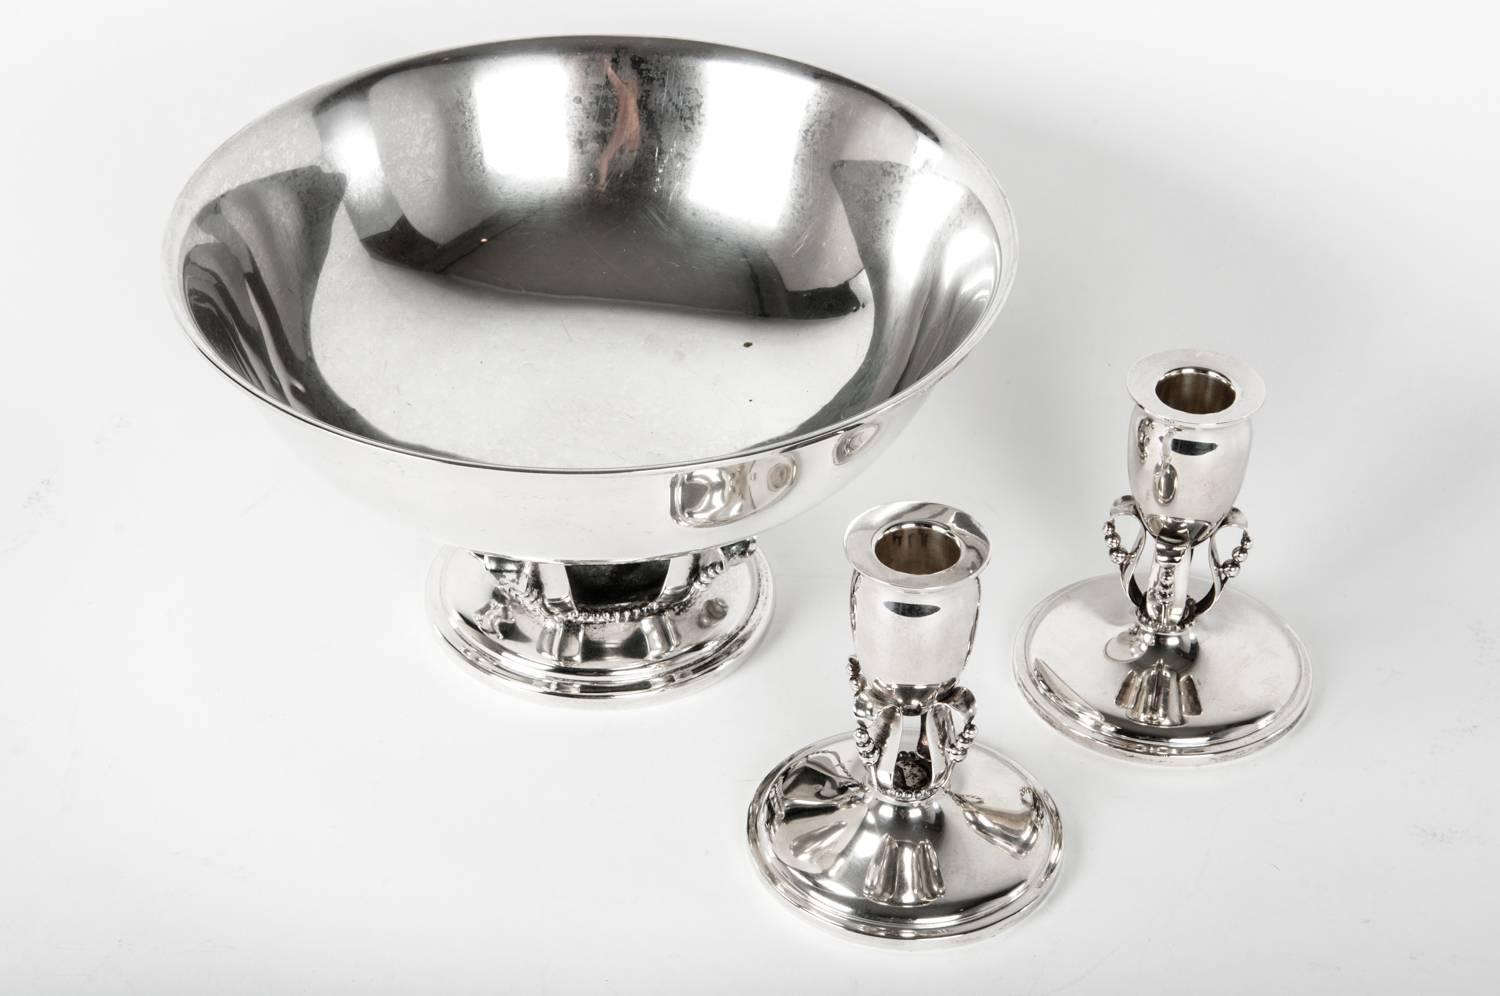 Sterling silver midcentury footed center piece bowl with two candle sticks. Each piece is undersigned and numbered. Each one is in good condition. These pieces would bring a great addition to any table, side board or mantel. The footed bowl measure